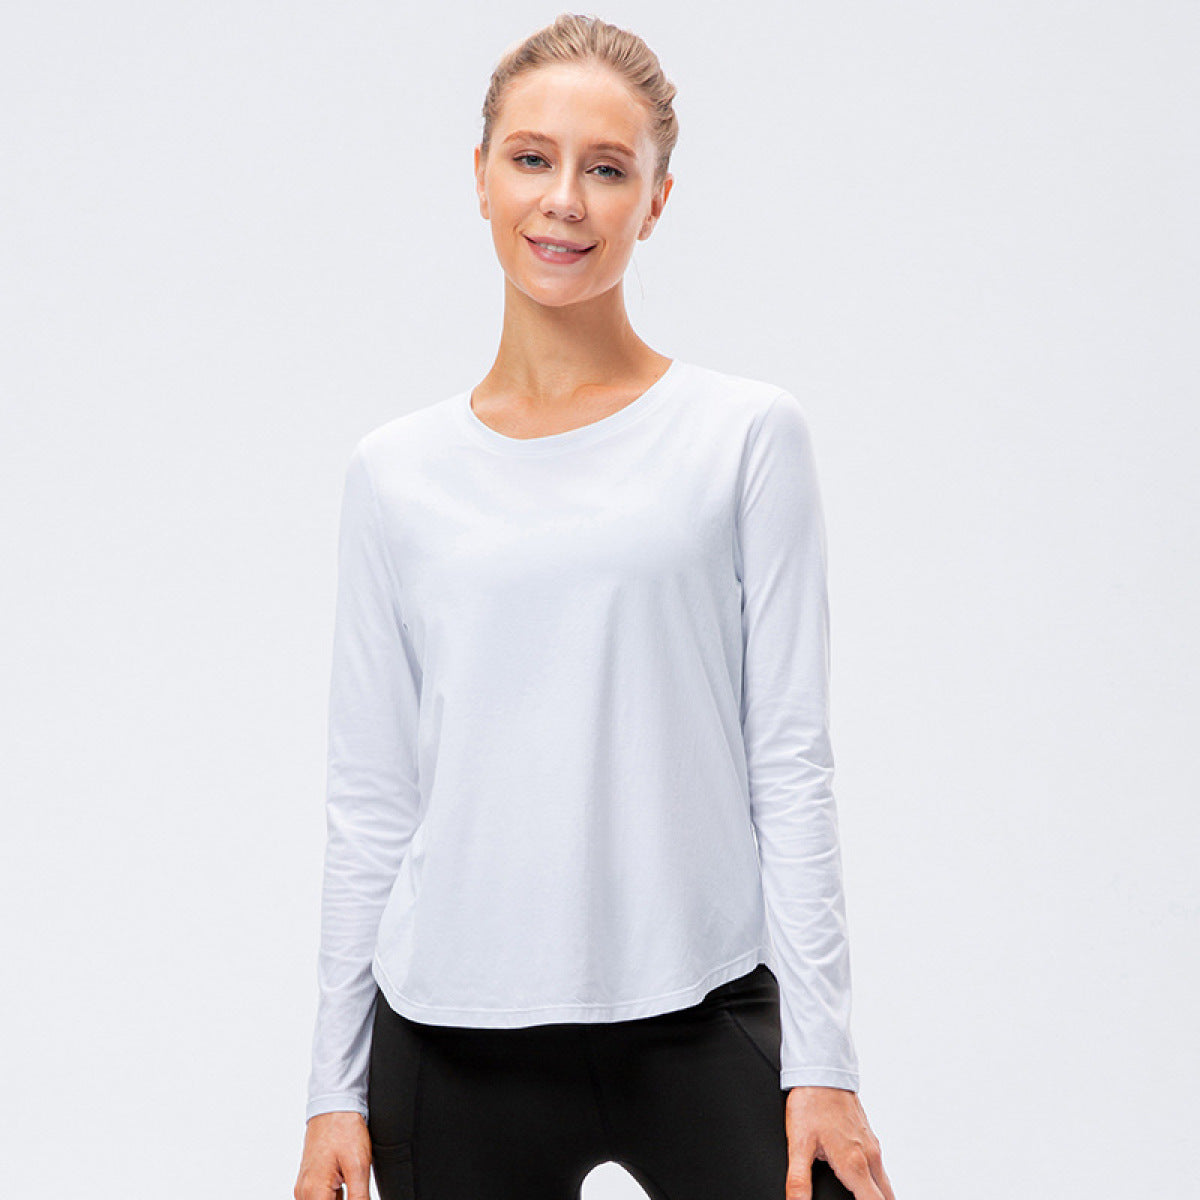 Women's Sports Long Sleeve Loose Quick-Drying Yoga Running Tops